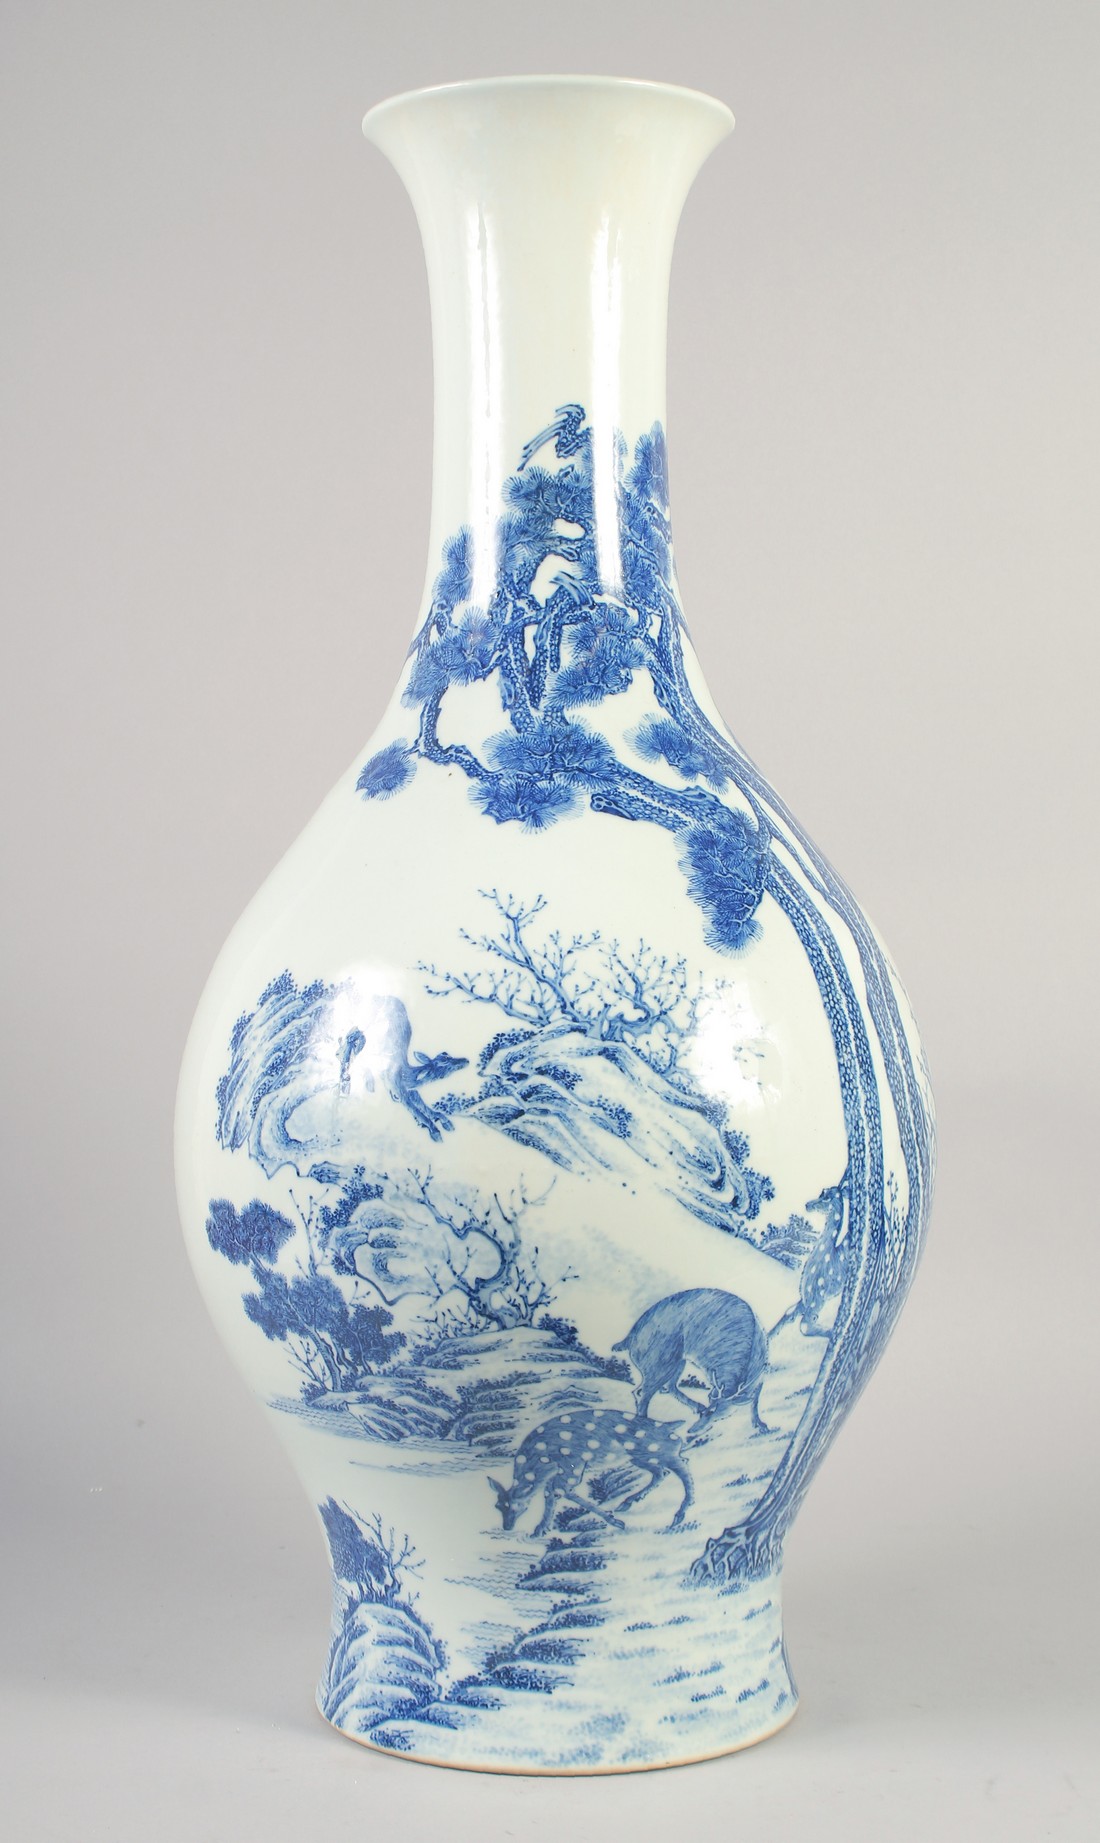 A LARGE EARLY 20TH CENTURY CHINESE BLUE AND WHITE VASE, painted with deer beside a pine tree, six-